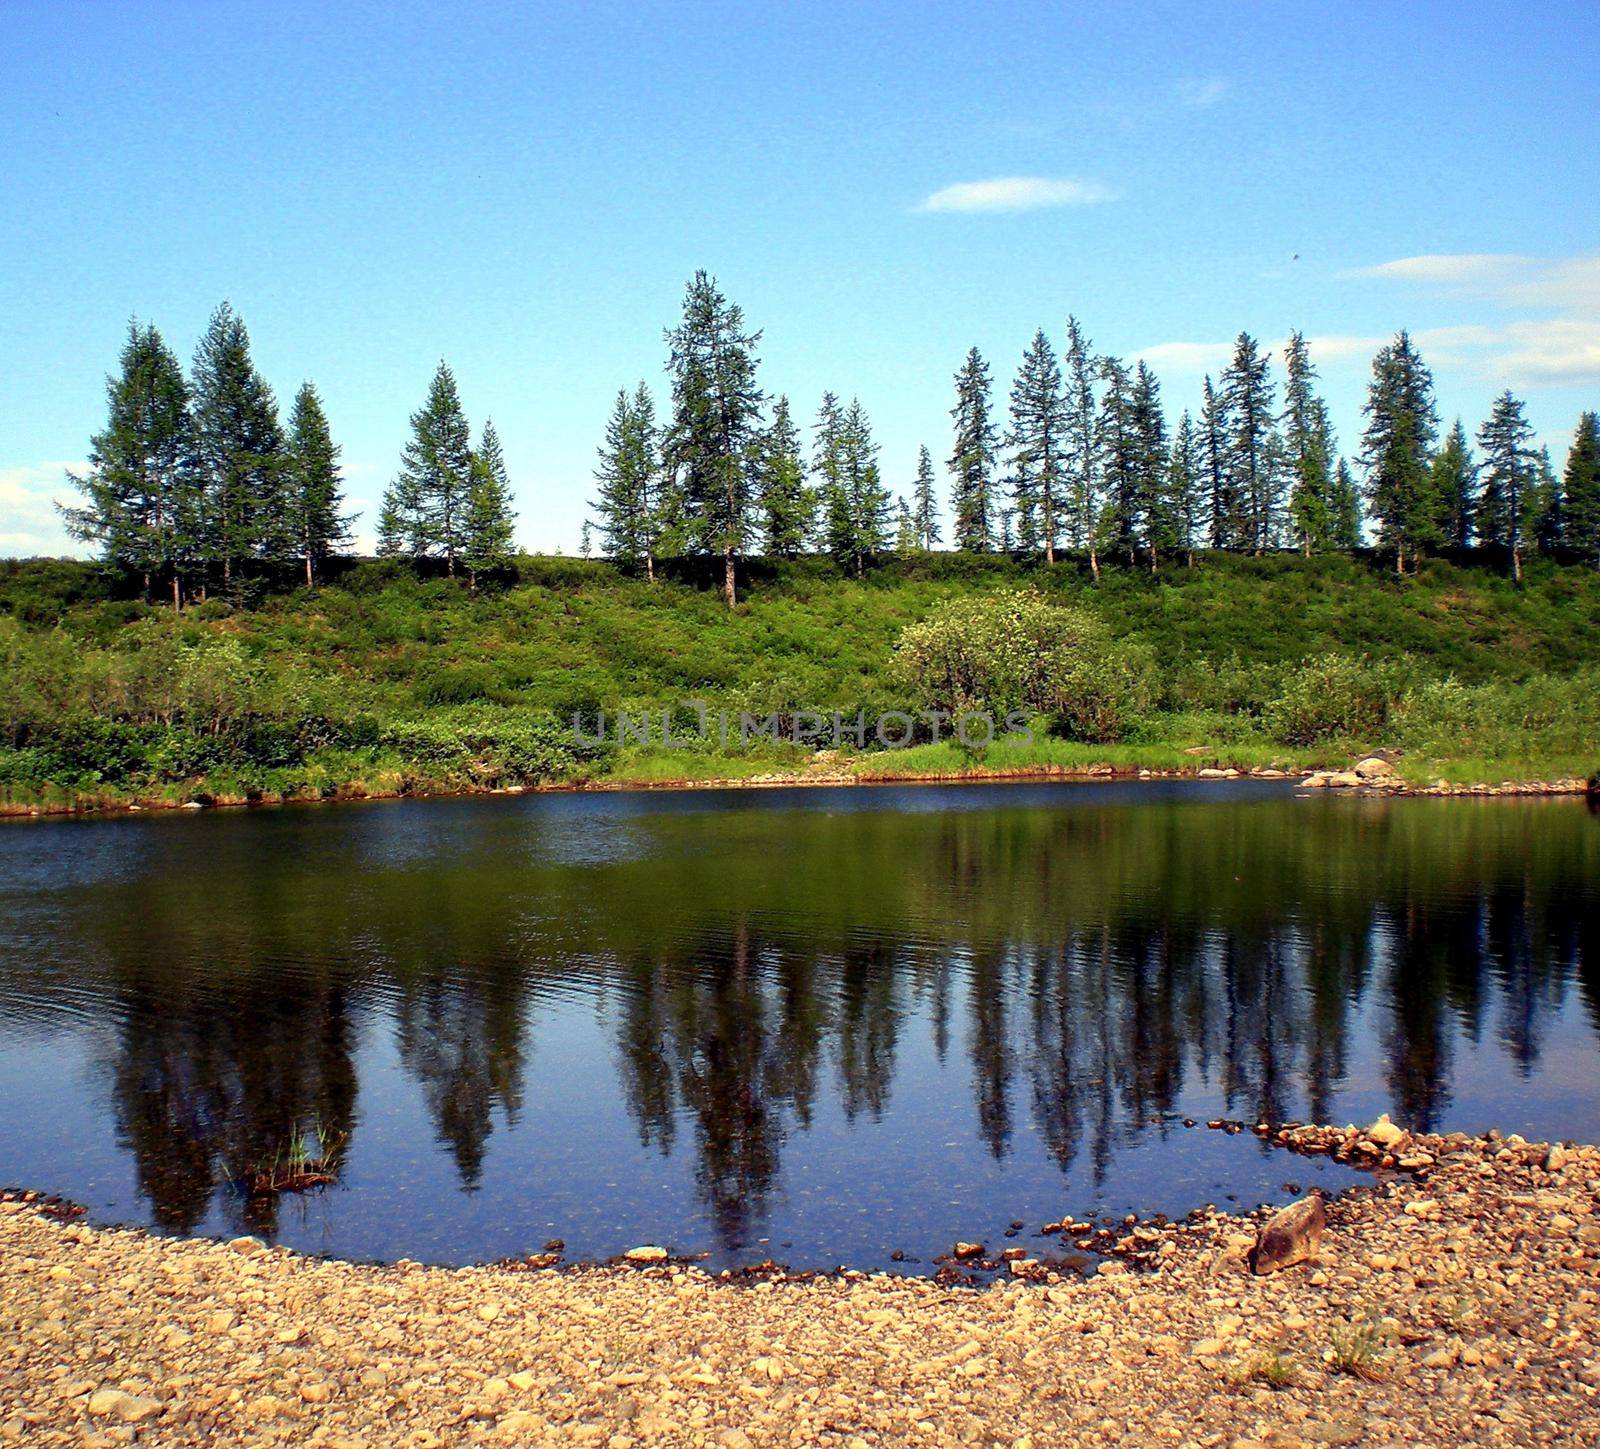 River in taiga in northern Russia. The nature of the taiga in a mountainous area. by DePo